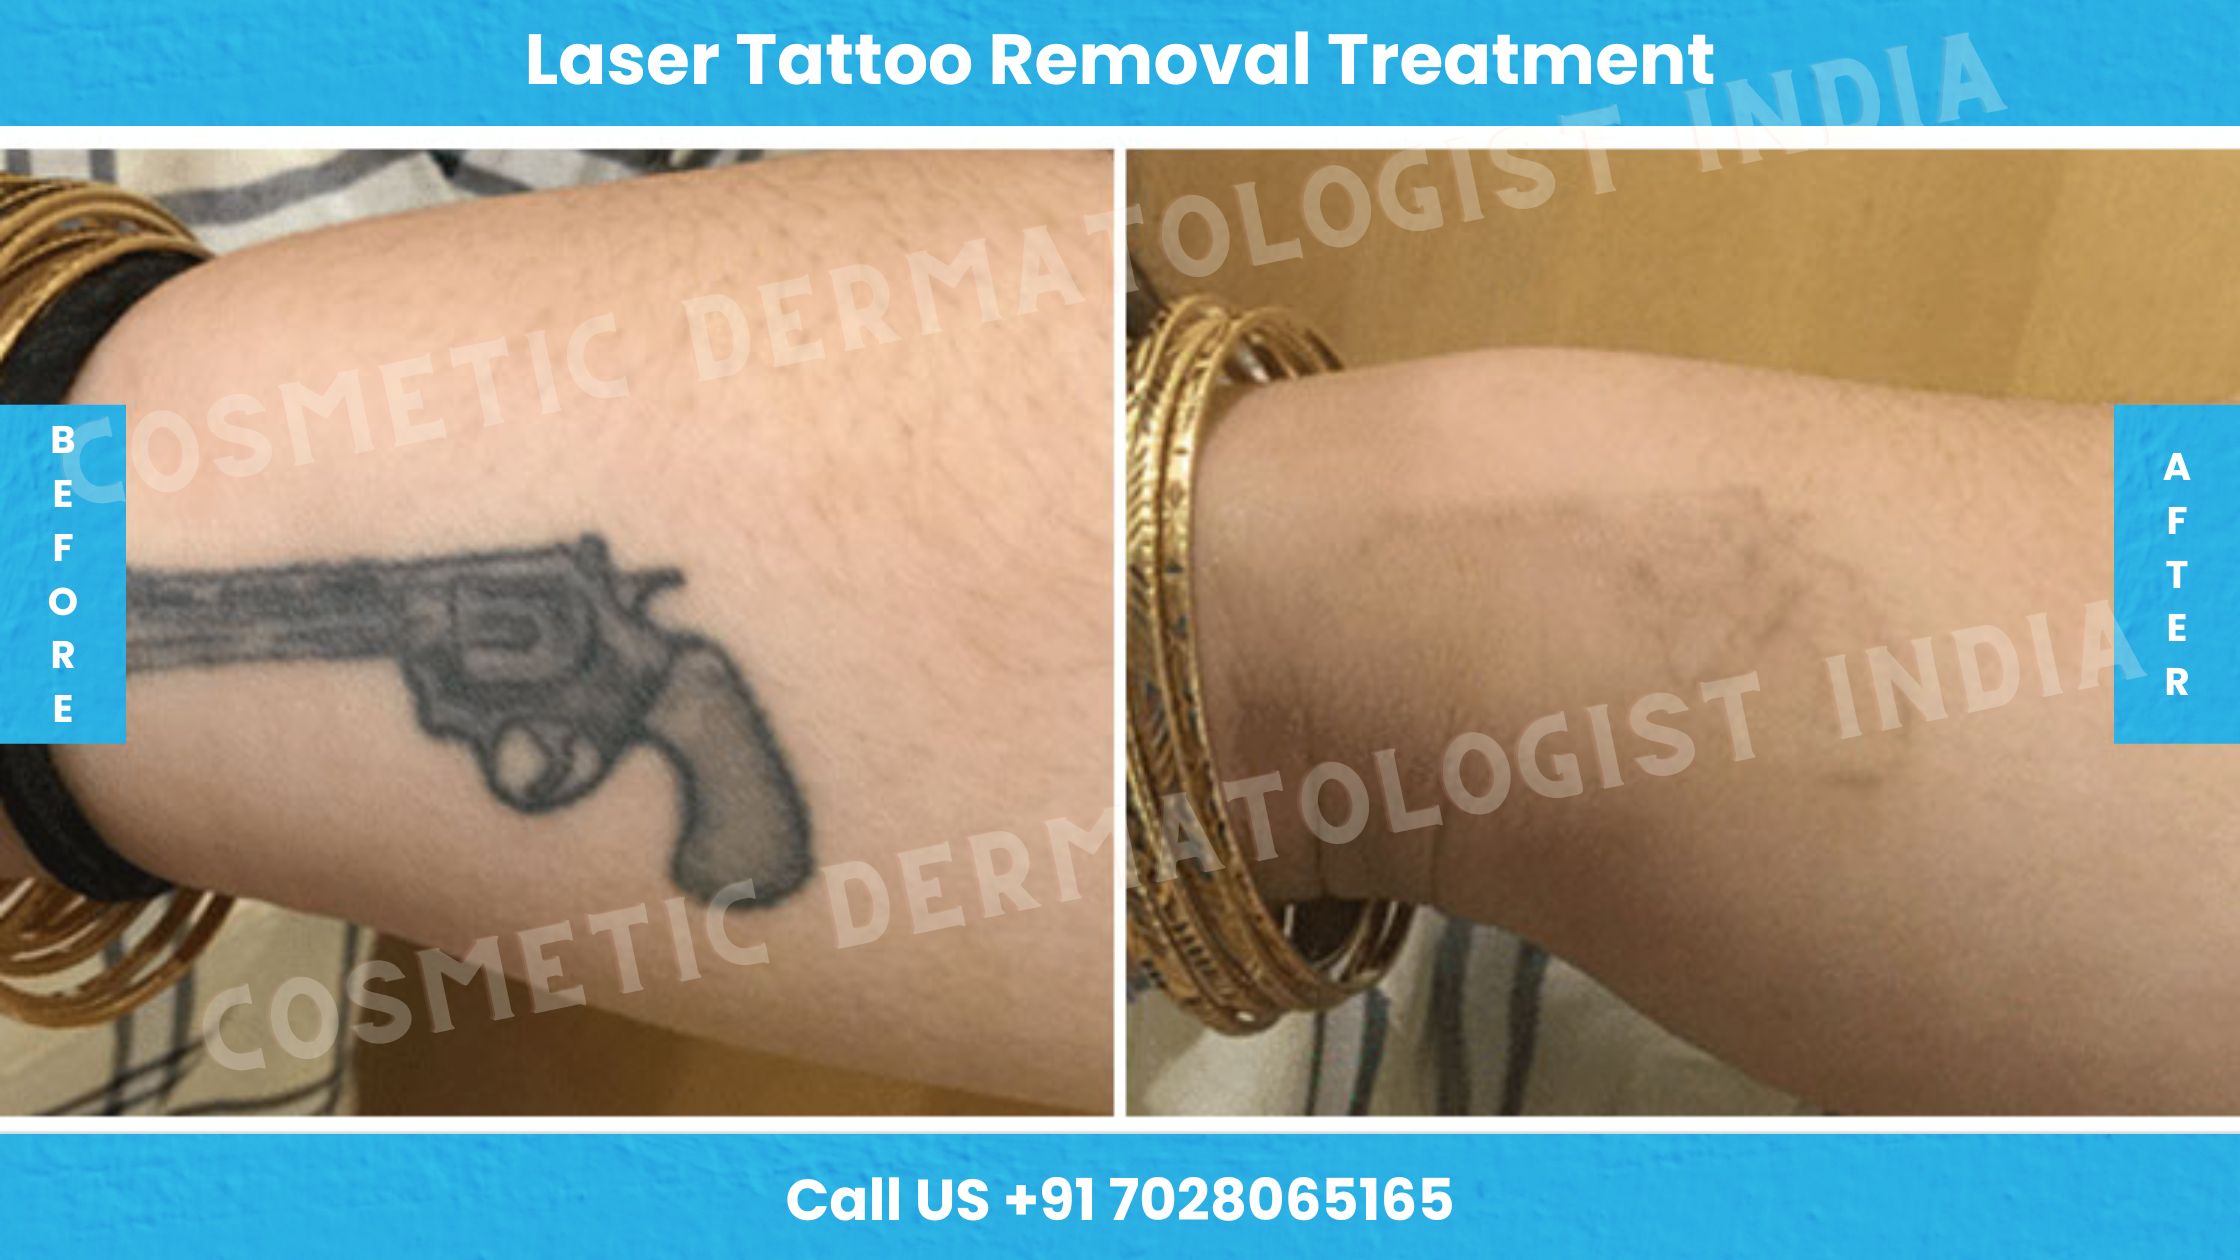 Before and After Images of Laser Tattoo Removal Treatment